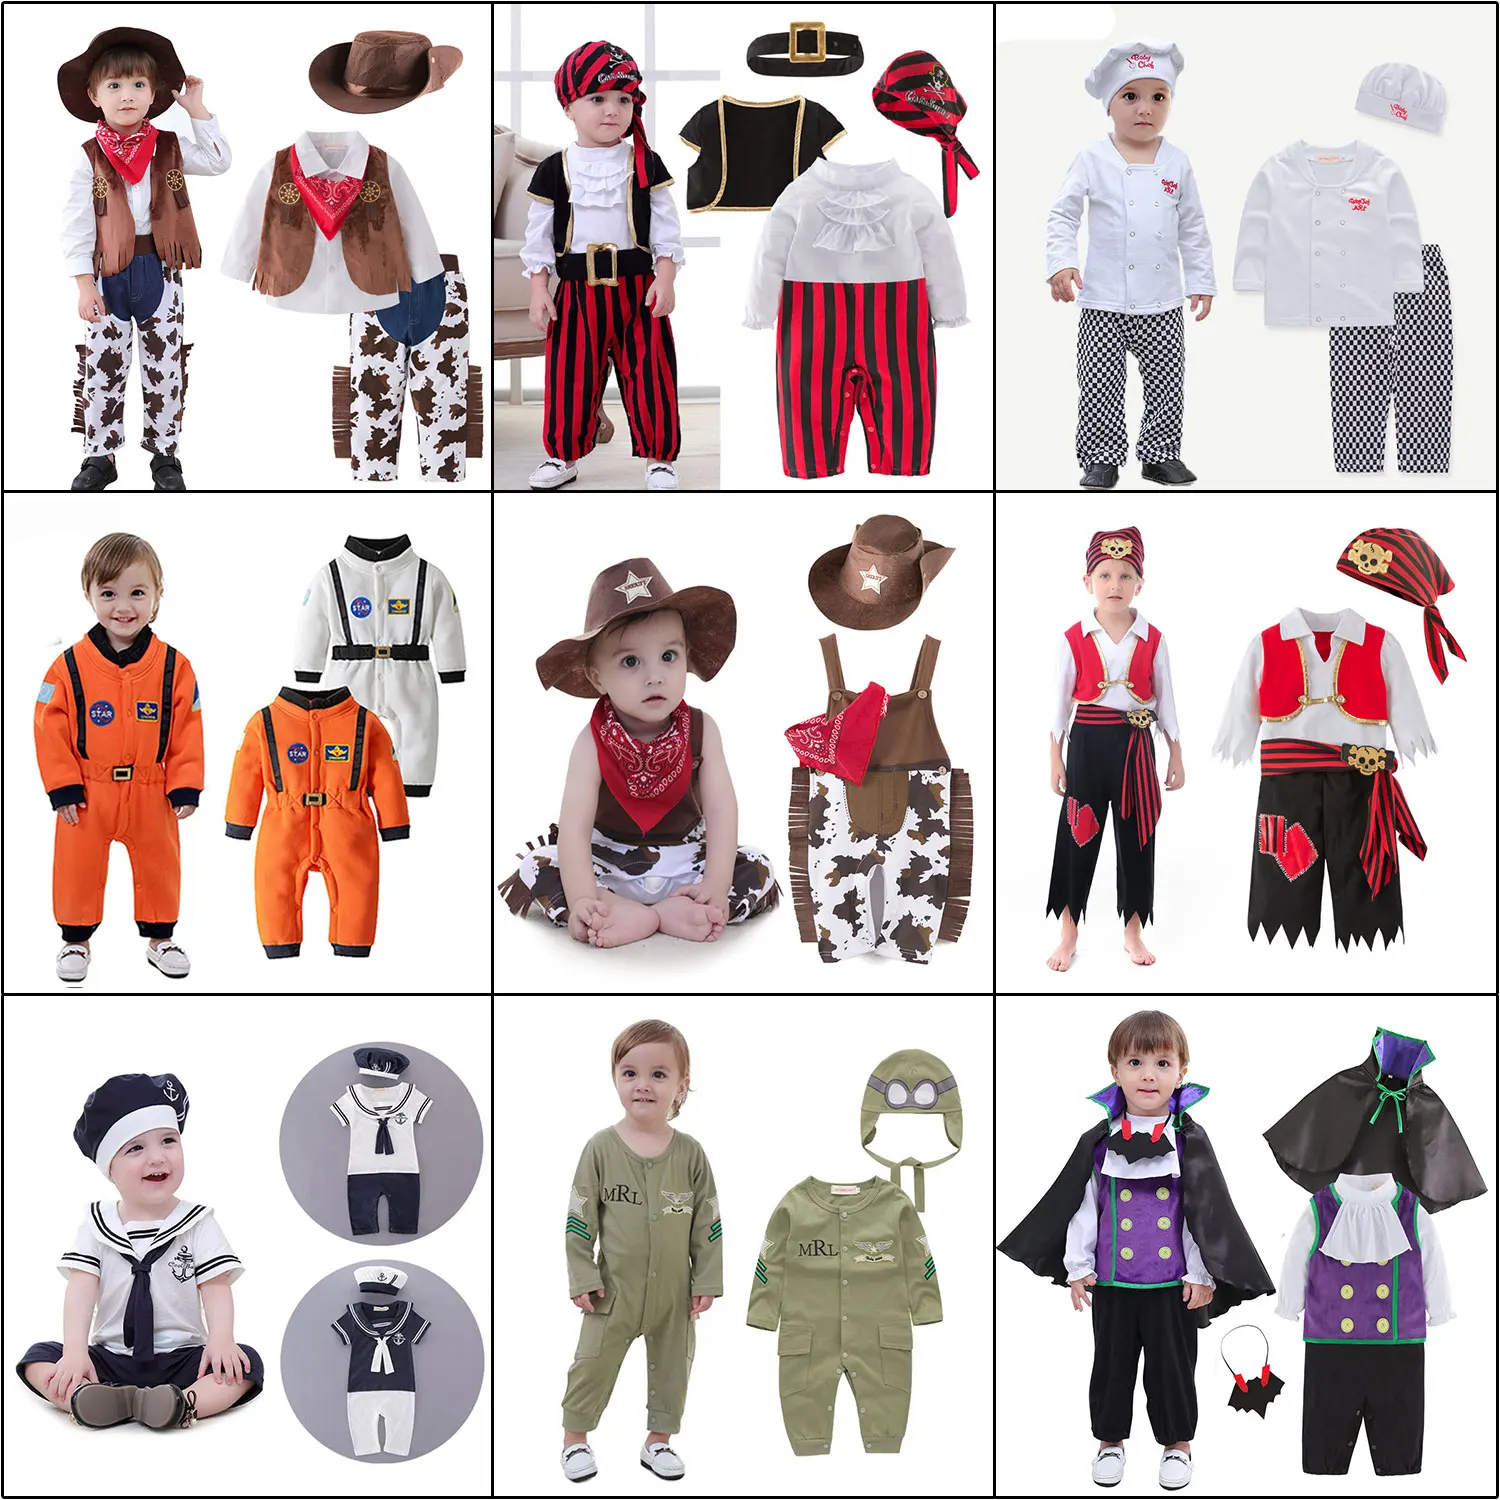 Umorden Toddler Baby Boys Purim Halloween Costumes Cosplay Cowboy Astronaut Pirate Occupation Role Play Outfit Fancy Dress Up